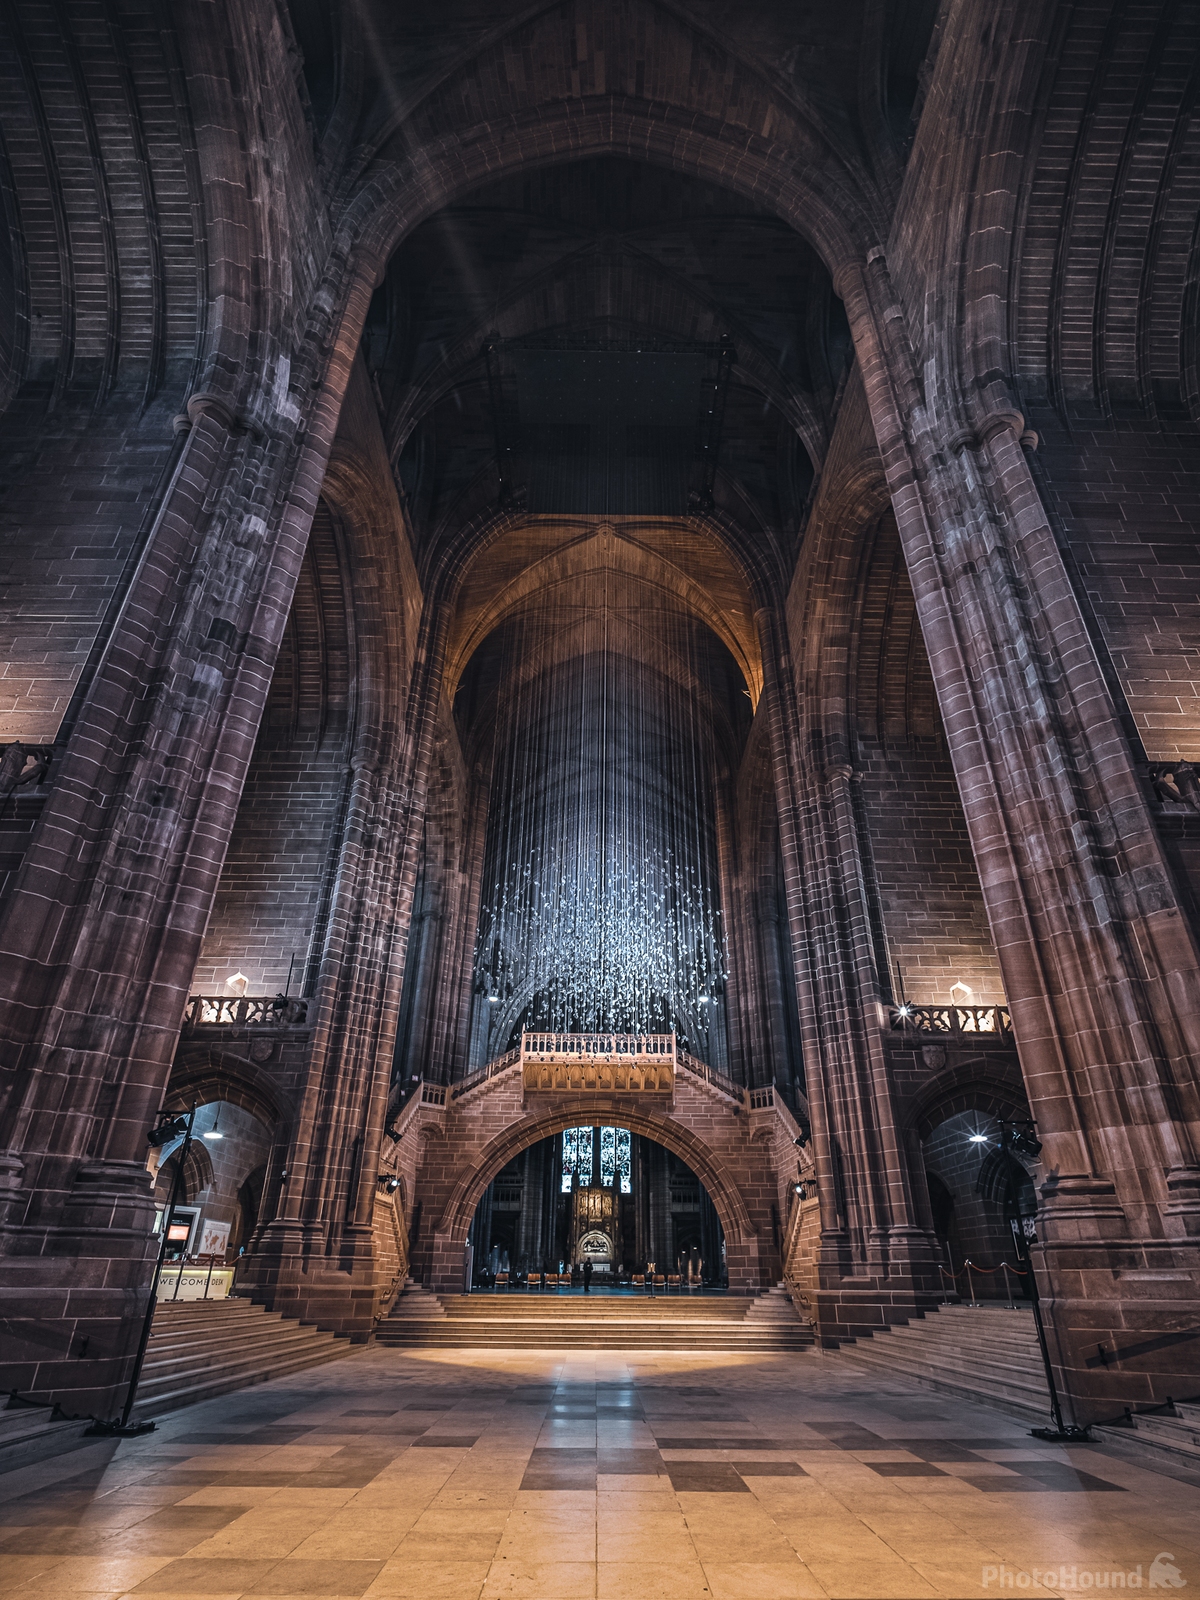 Image of Liverpool Cathedral by James Billings.